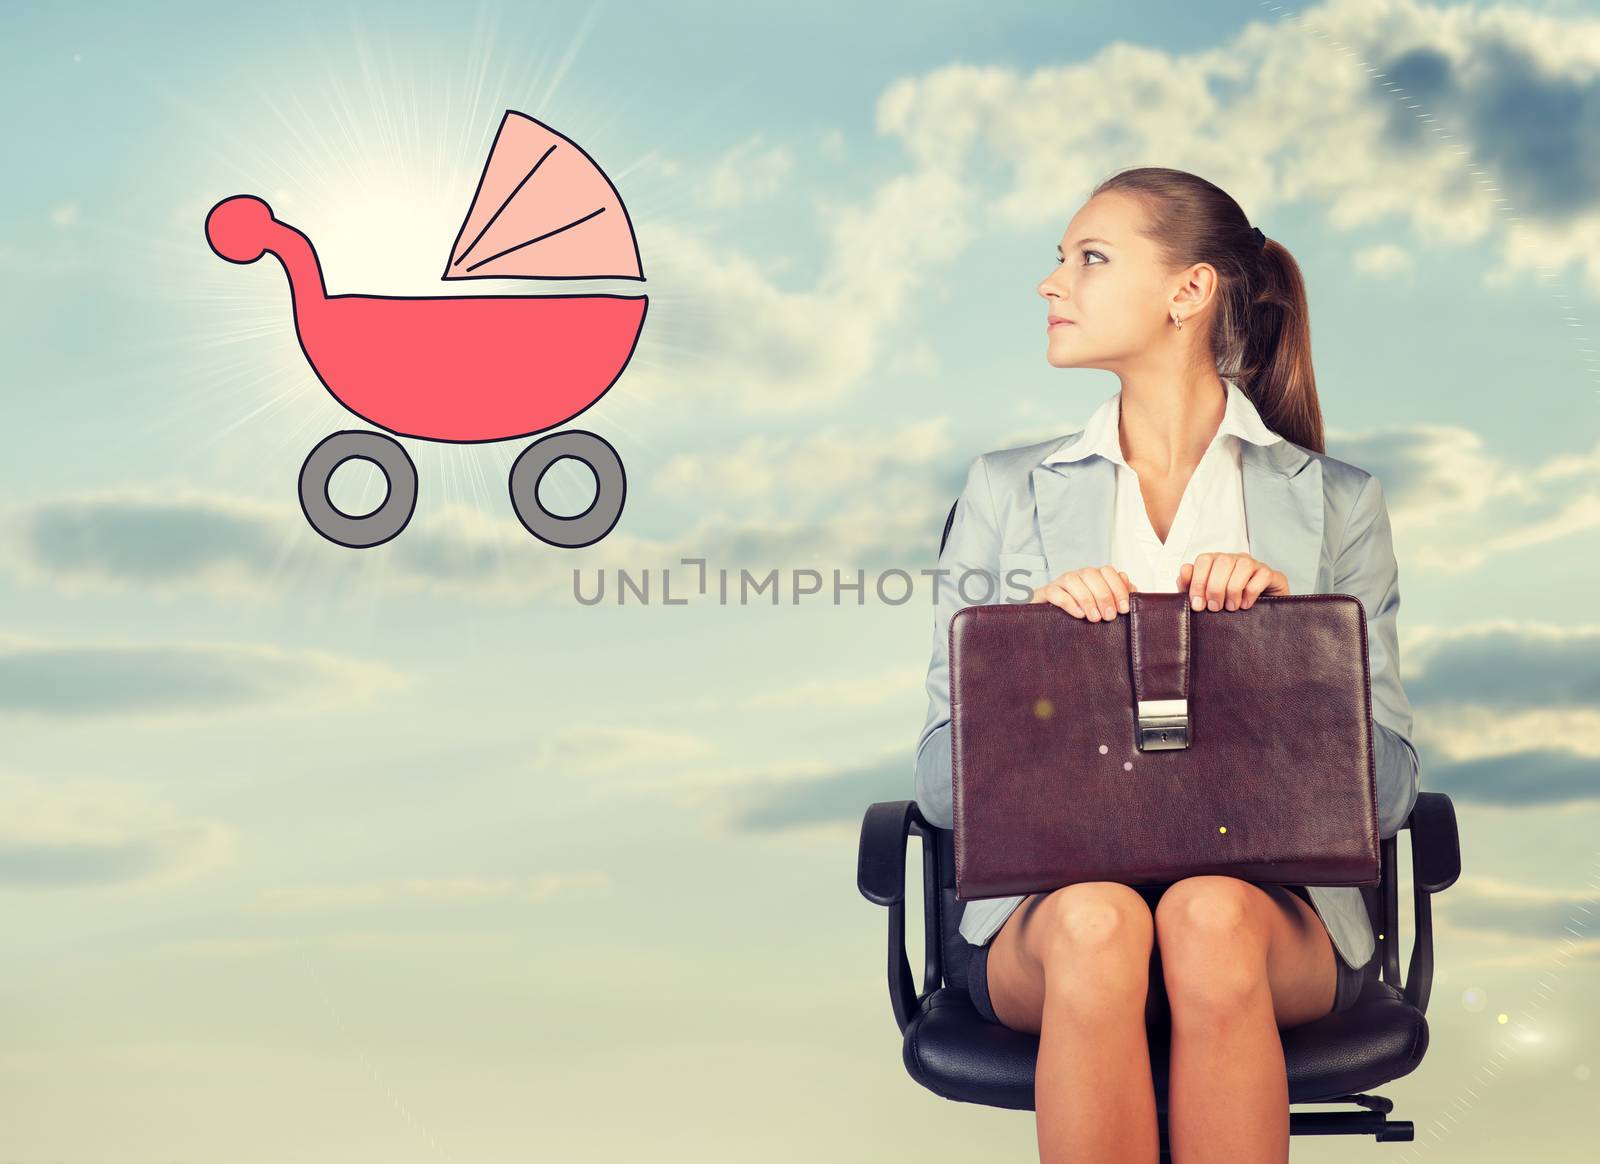 Business woman in skirt, blouse and jacket, sitting on chair, holding briefcase imagines buggy. Against background of sky, clouds by cherezoff